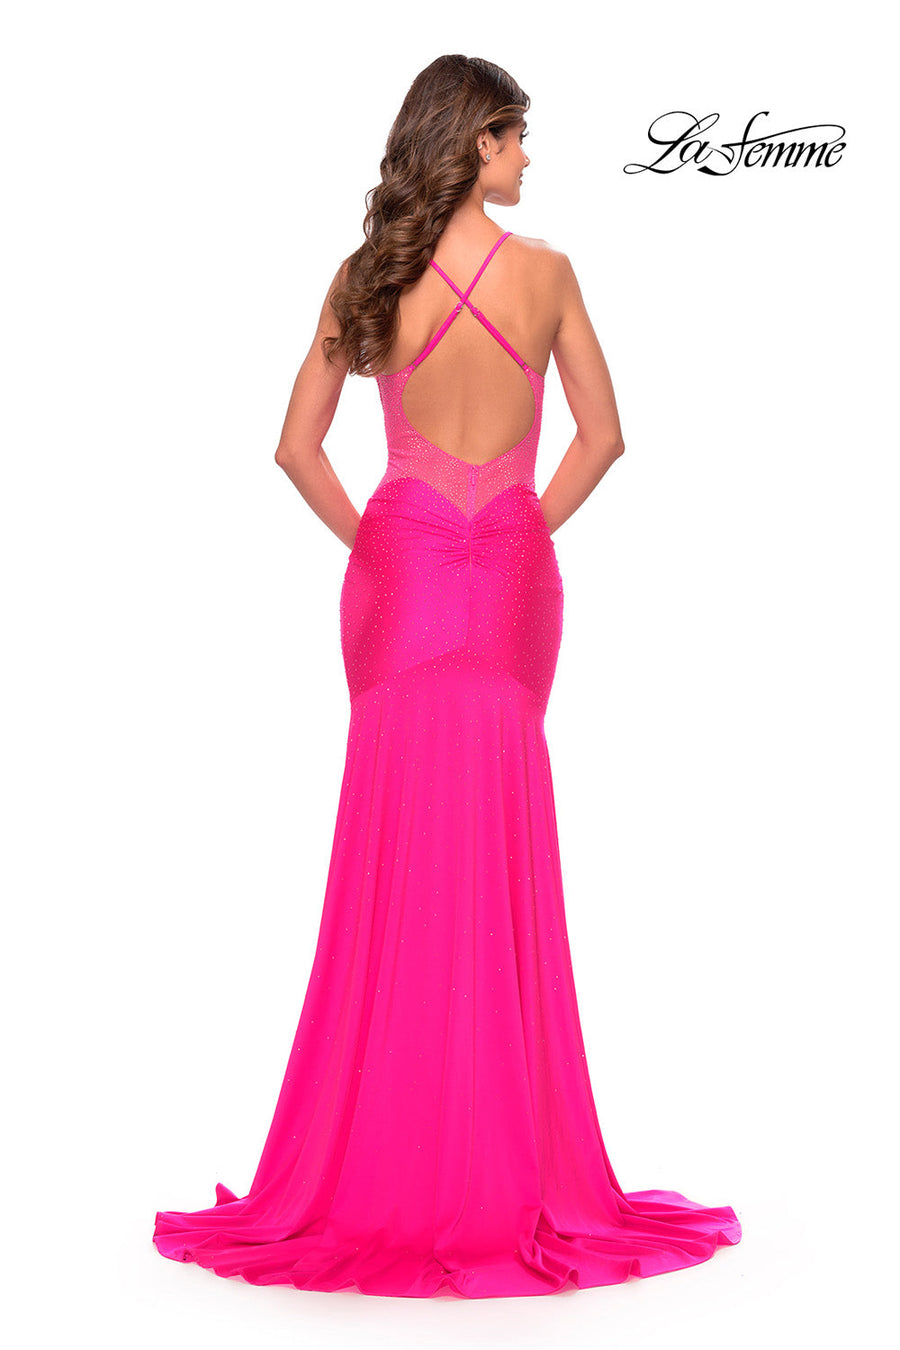 La Femme 31403 prom dress images.  La Femme 31403 is available in these colors: Light Periwinkle, Neon Pink.